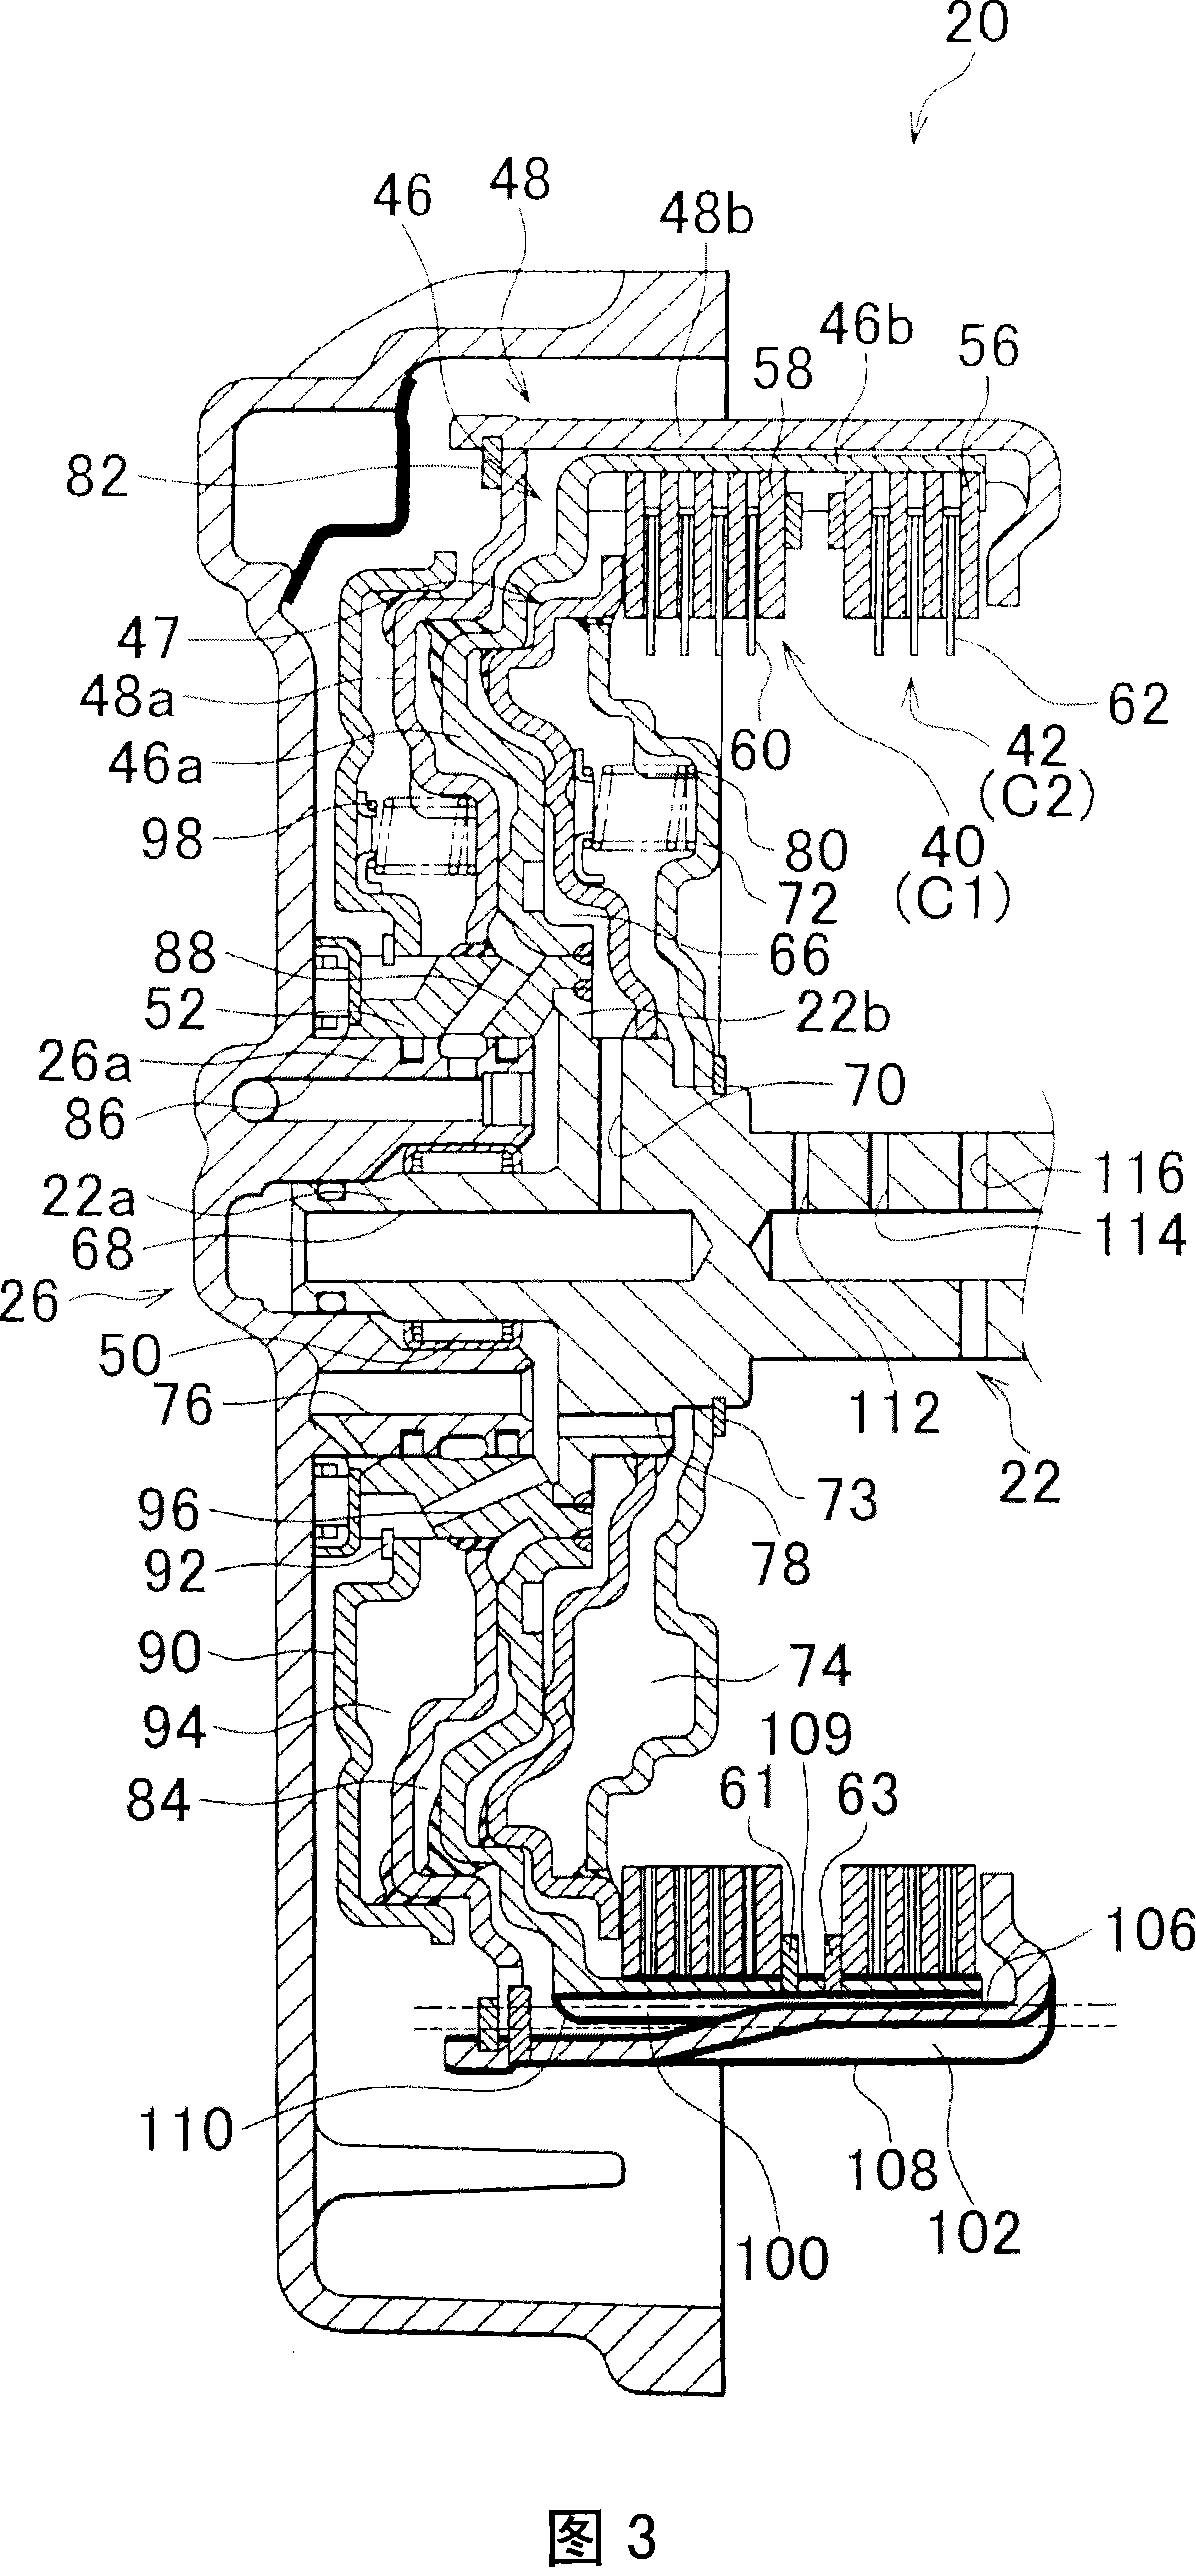 Power transmission system for vehicle